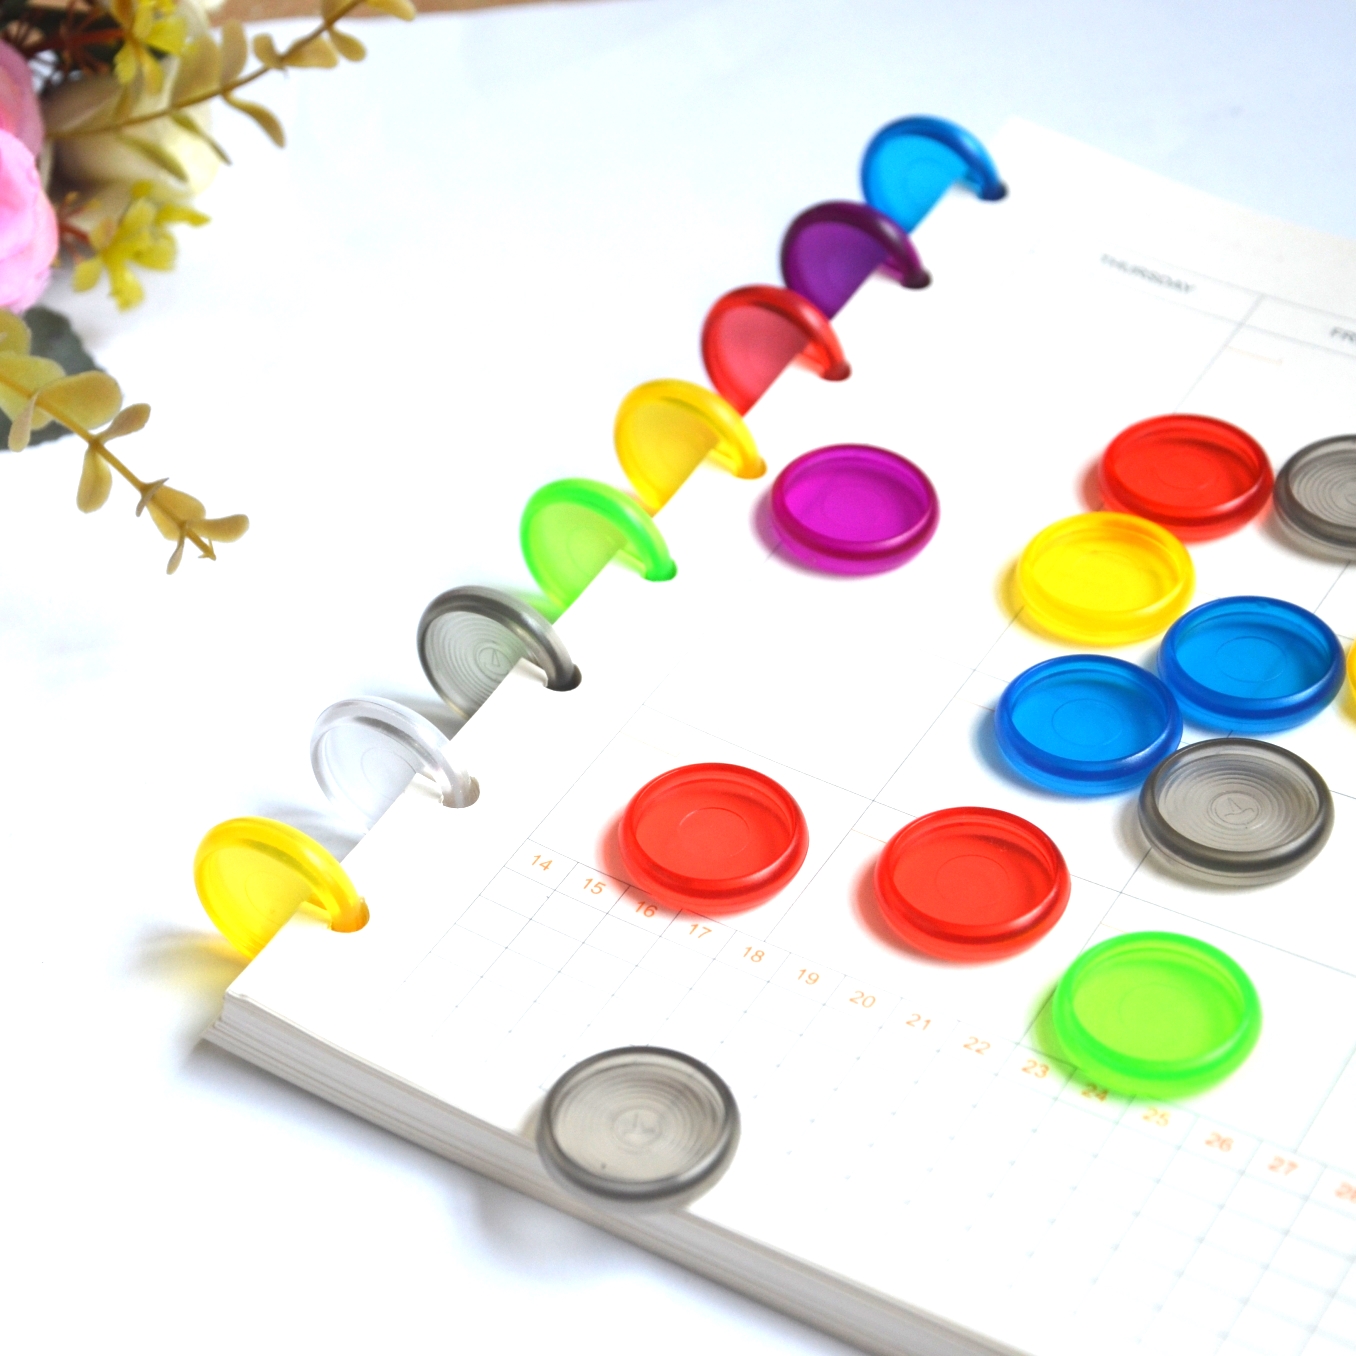 100pcs 24mm Plastic Binding Ring Buckle Color Button-like Binder Accessories Mushroom Hole Books Buckle Piece Ring Bingding Disc